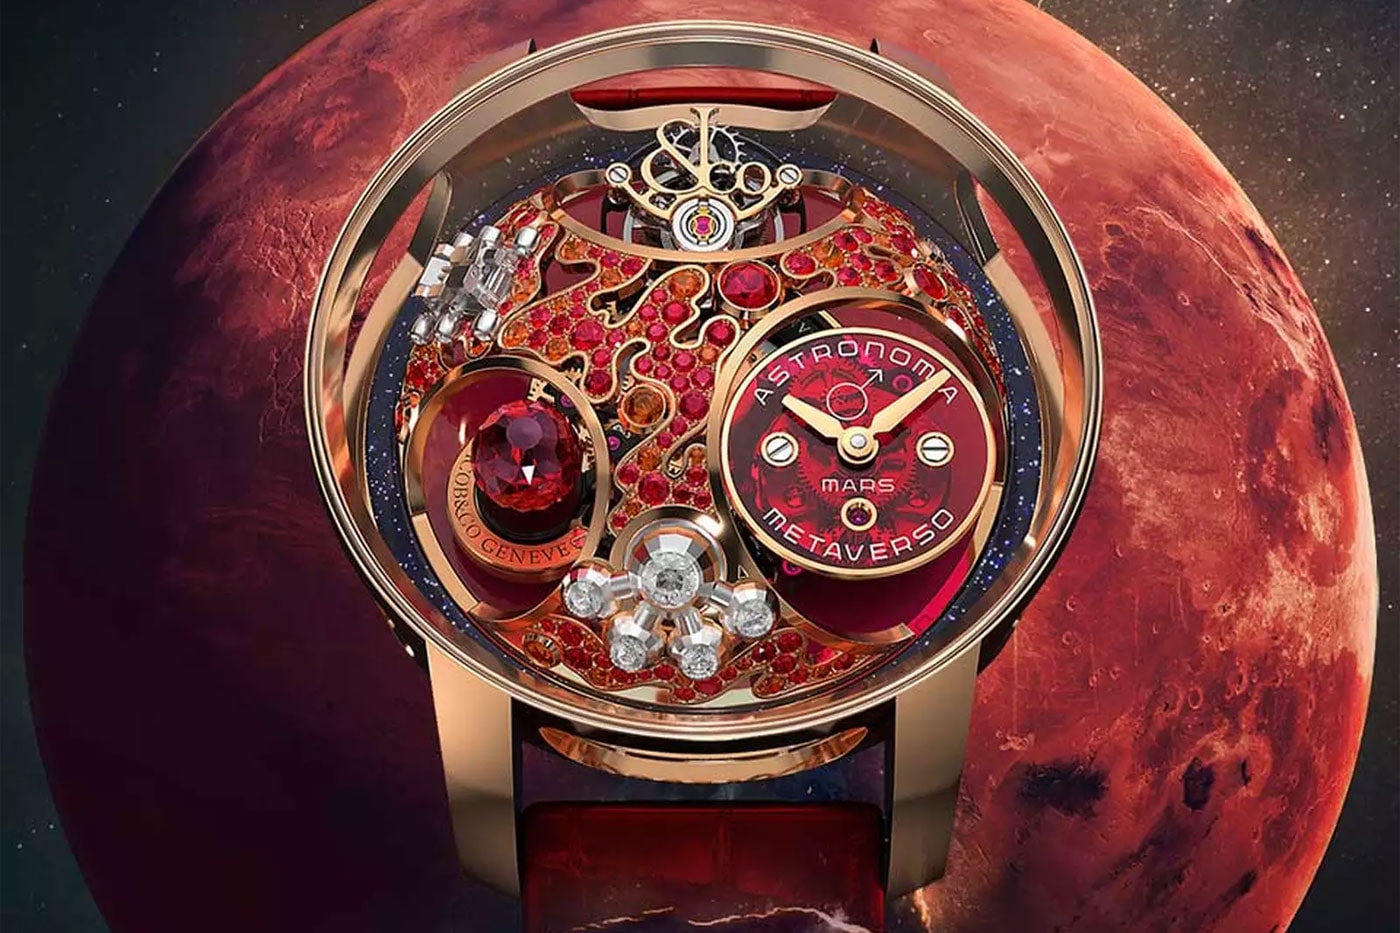 Jacob & Co. Launches Into NFTs With New "Astronomia Metaverso"Collection metaverse ethereum bitcoin binance zodiac signs unxd luxury utility non fungible tokens stars jacab arabo jewelry watches